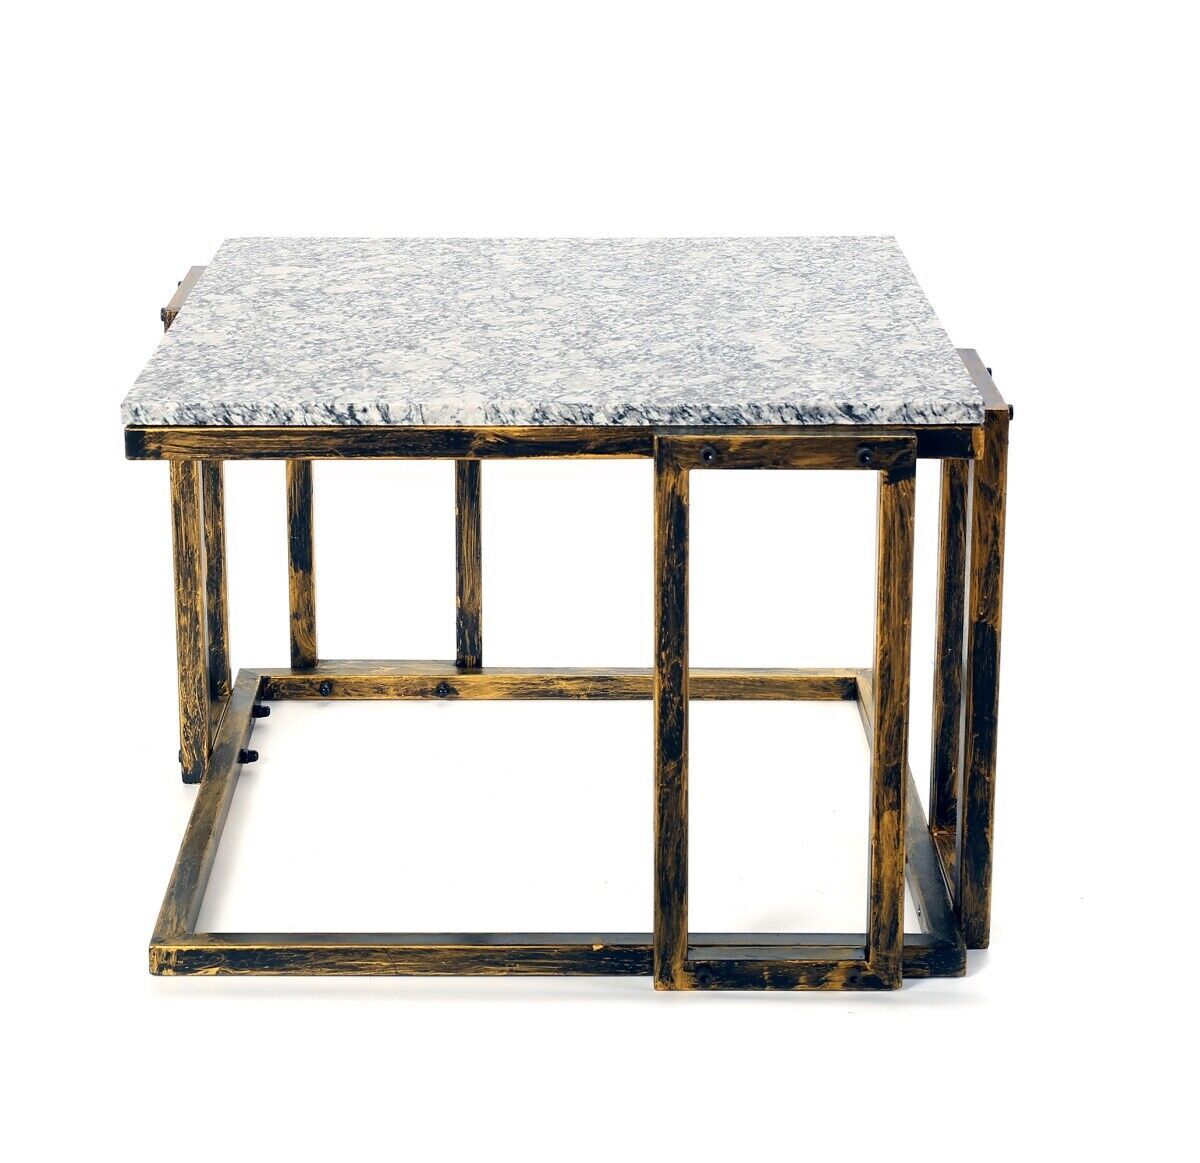 Primary image for ORE International L1907 14.5 in. Granite Marble Black & Gold Plant Stand